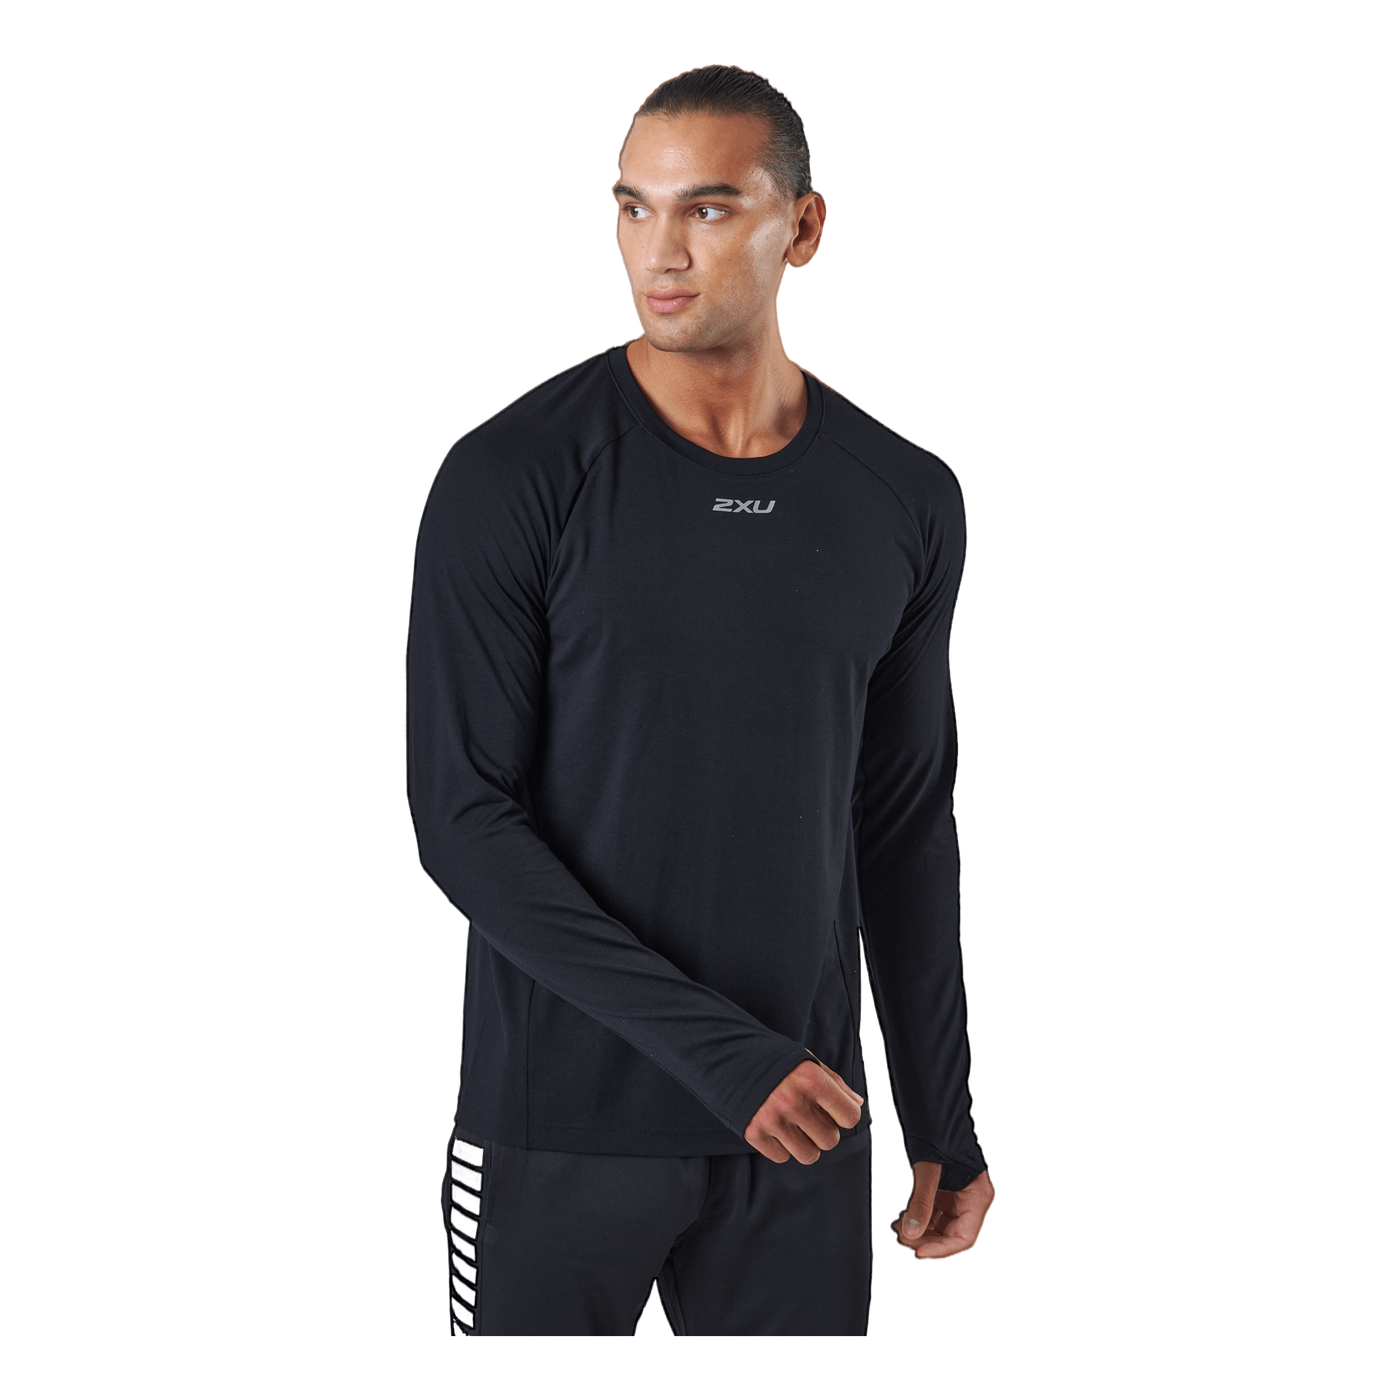 Ignition Base Layer L/s Black/silver Reflective